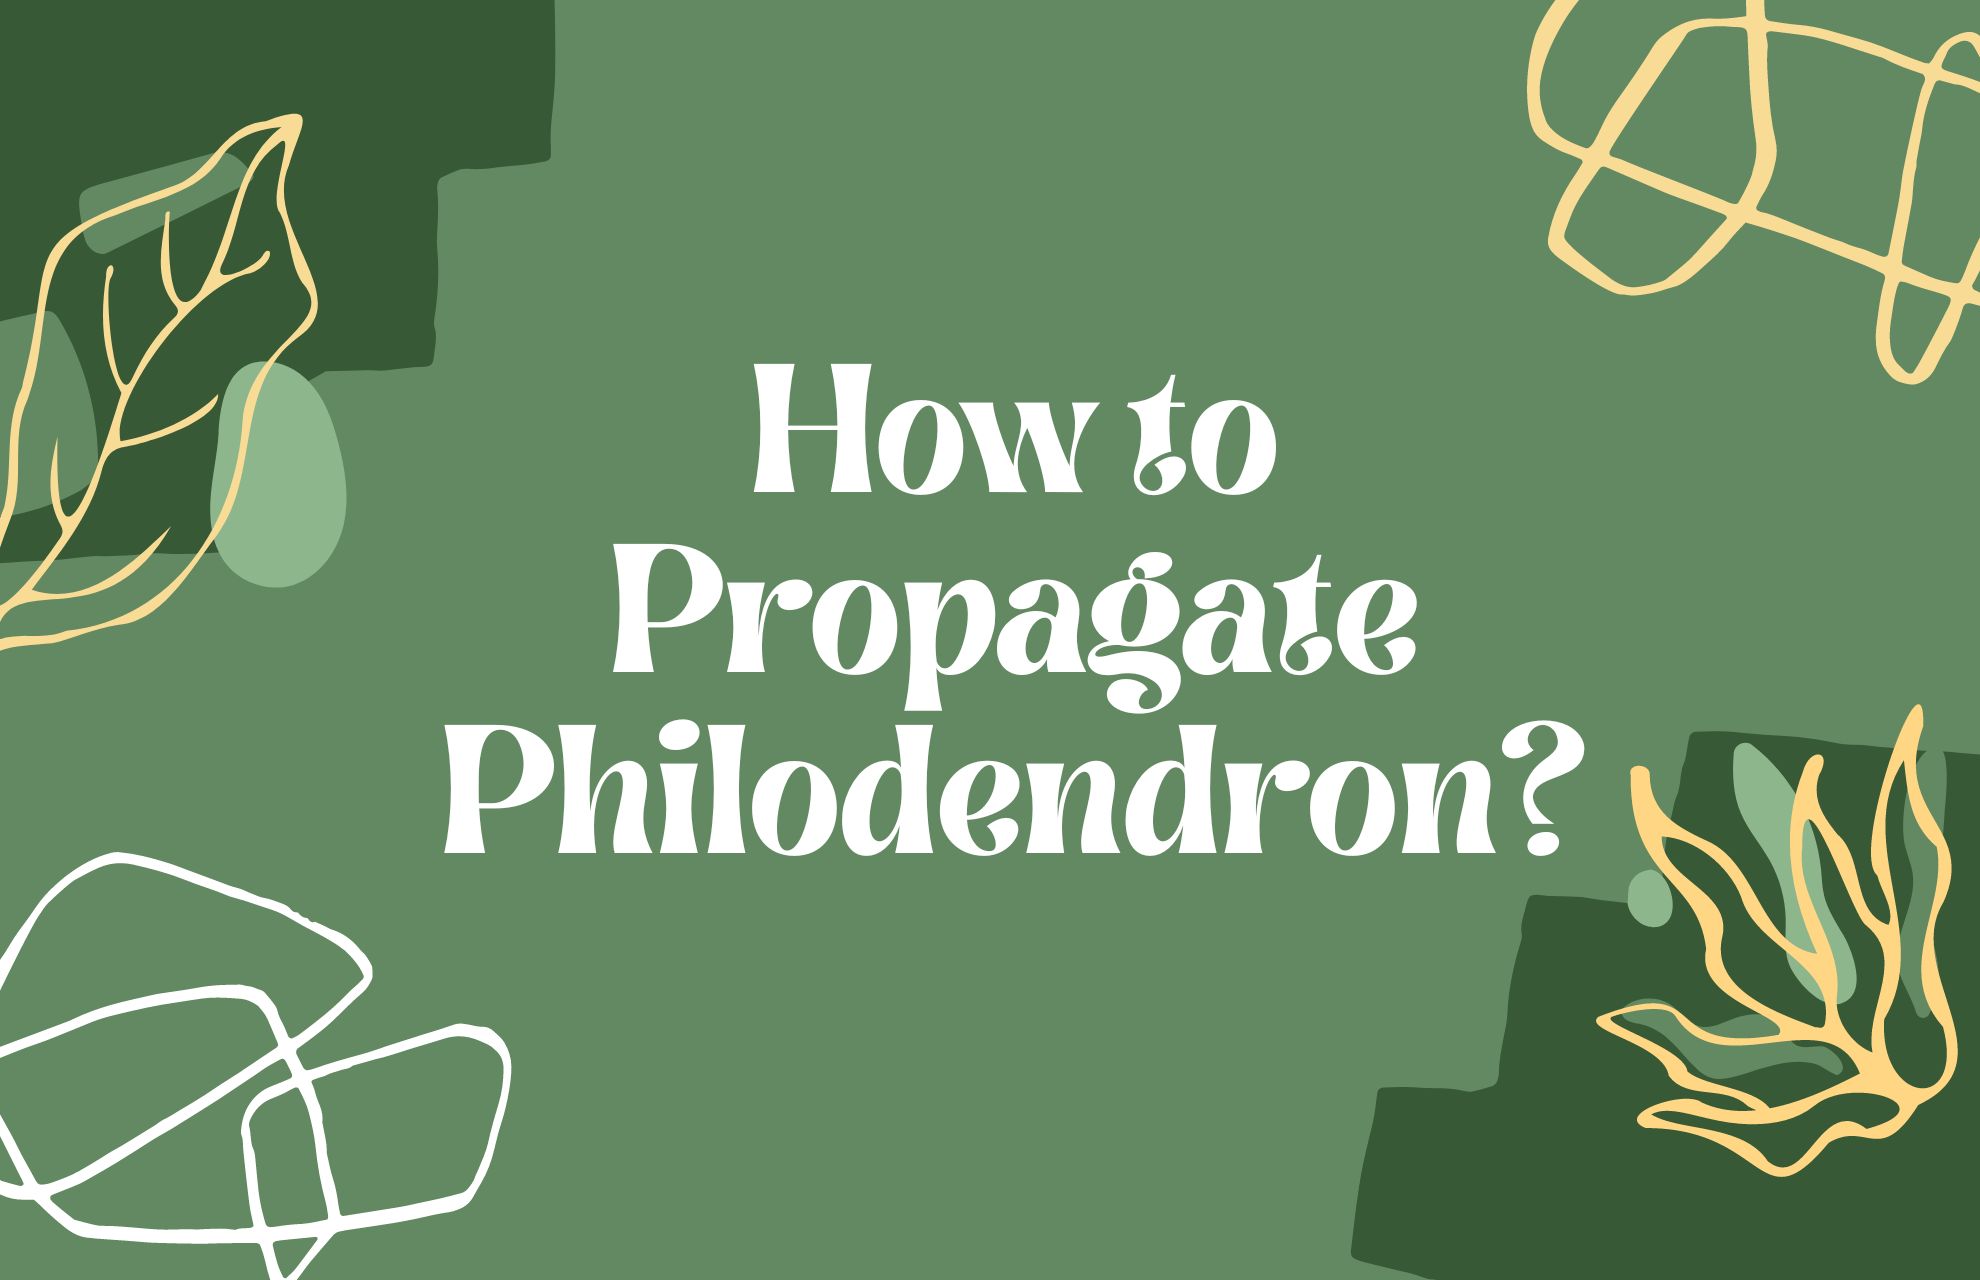 How to Propagate Philodendron? 3 Methods